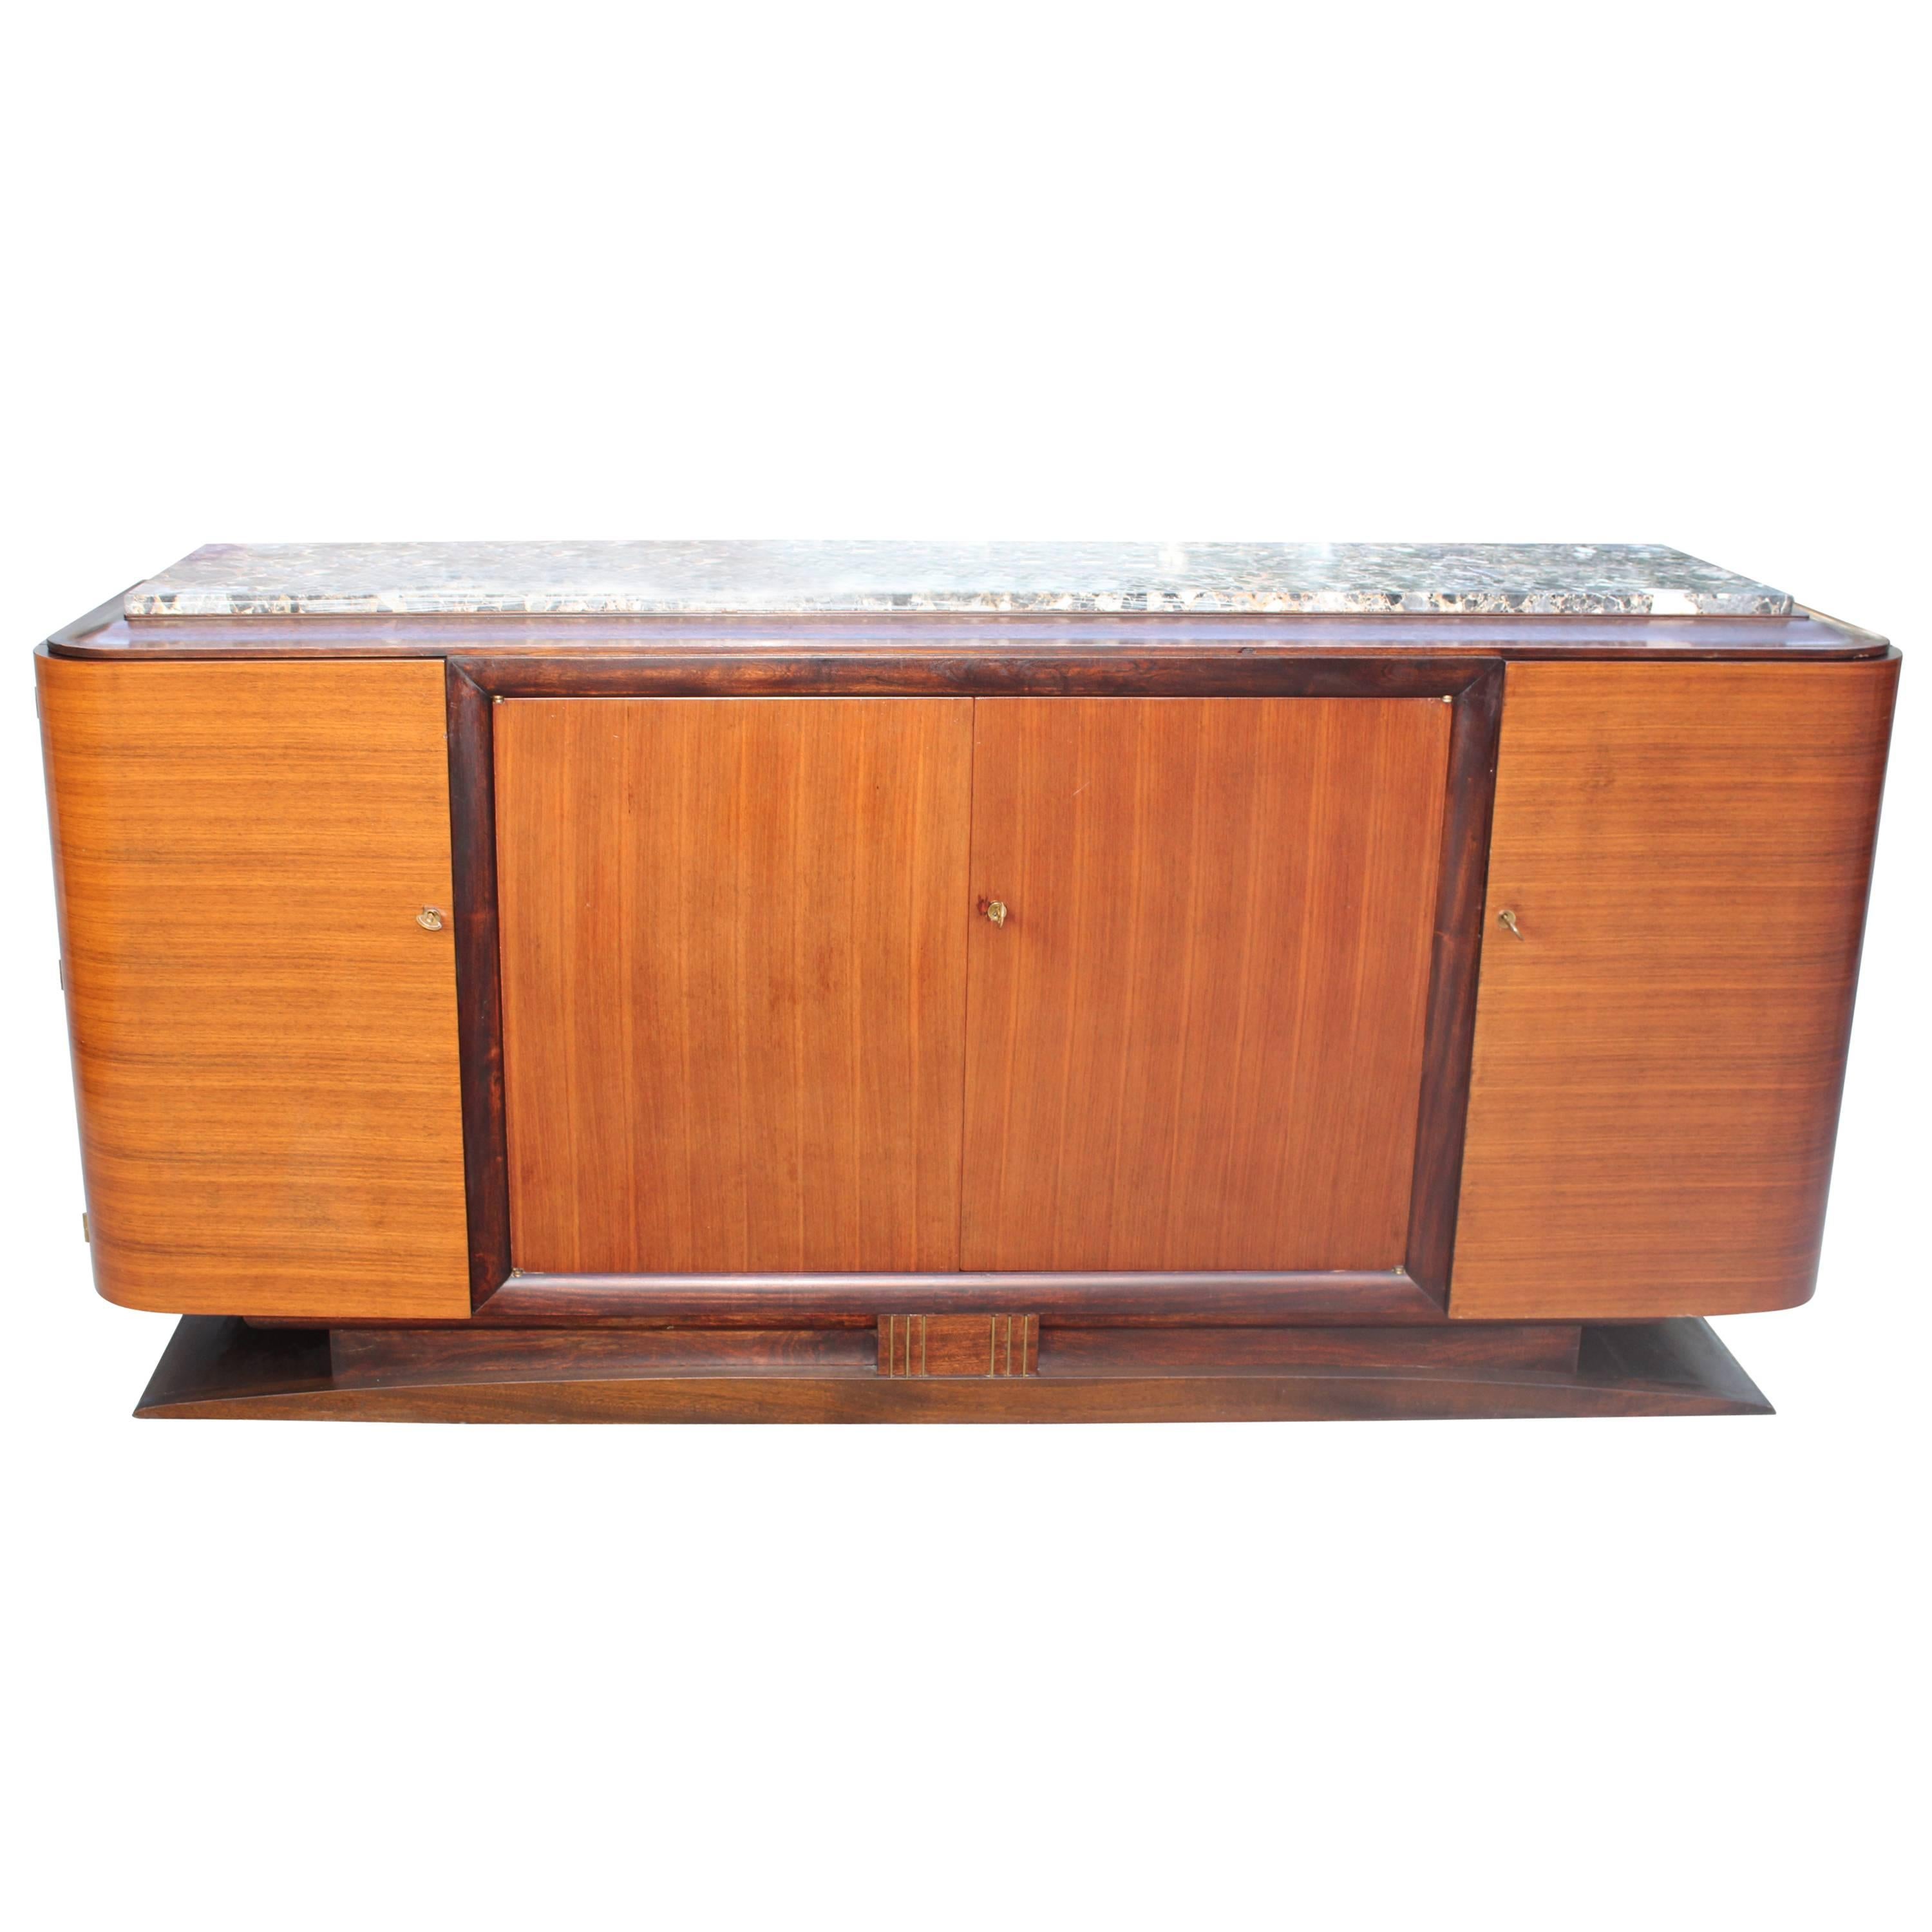 Grand French Art Deco Exotic Macassar Sideboard with Marble Top, circa 1940s.